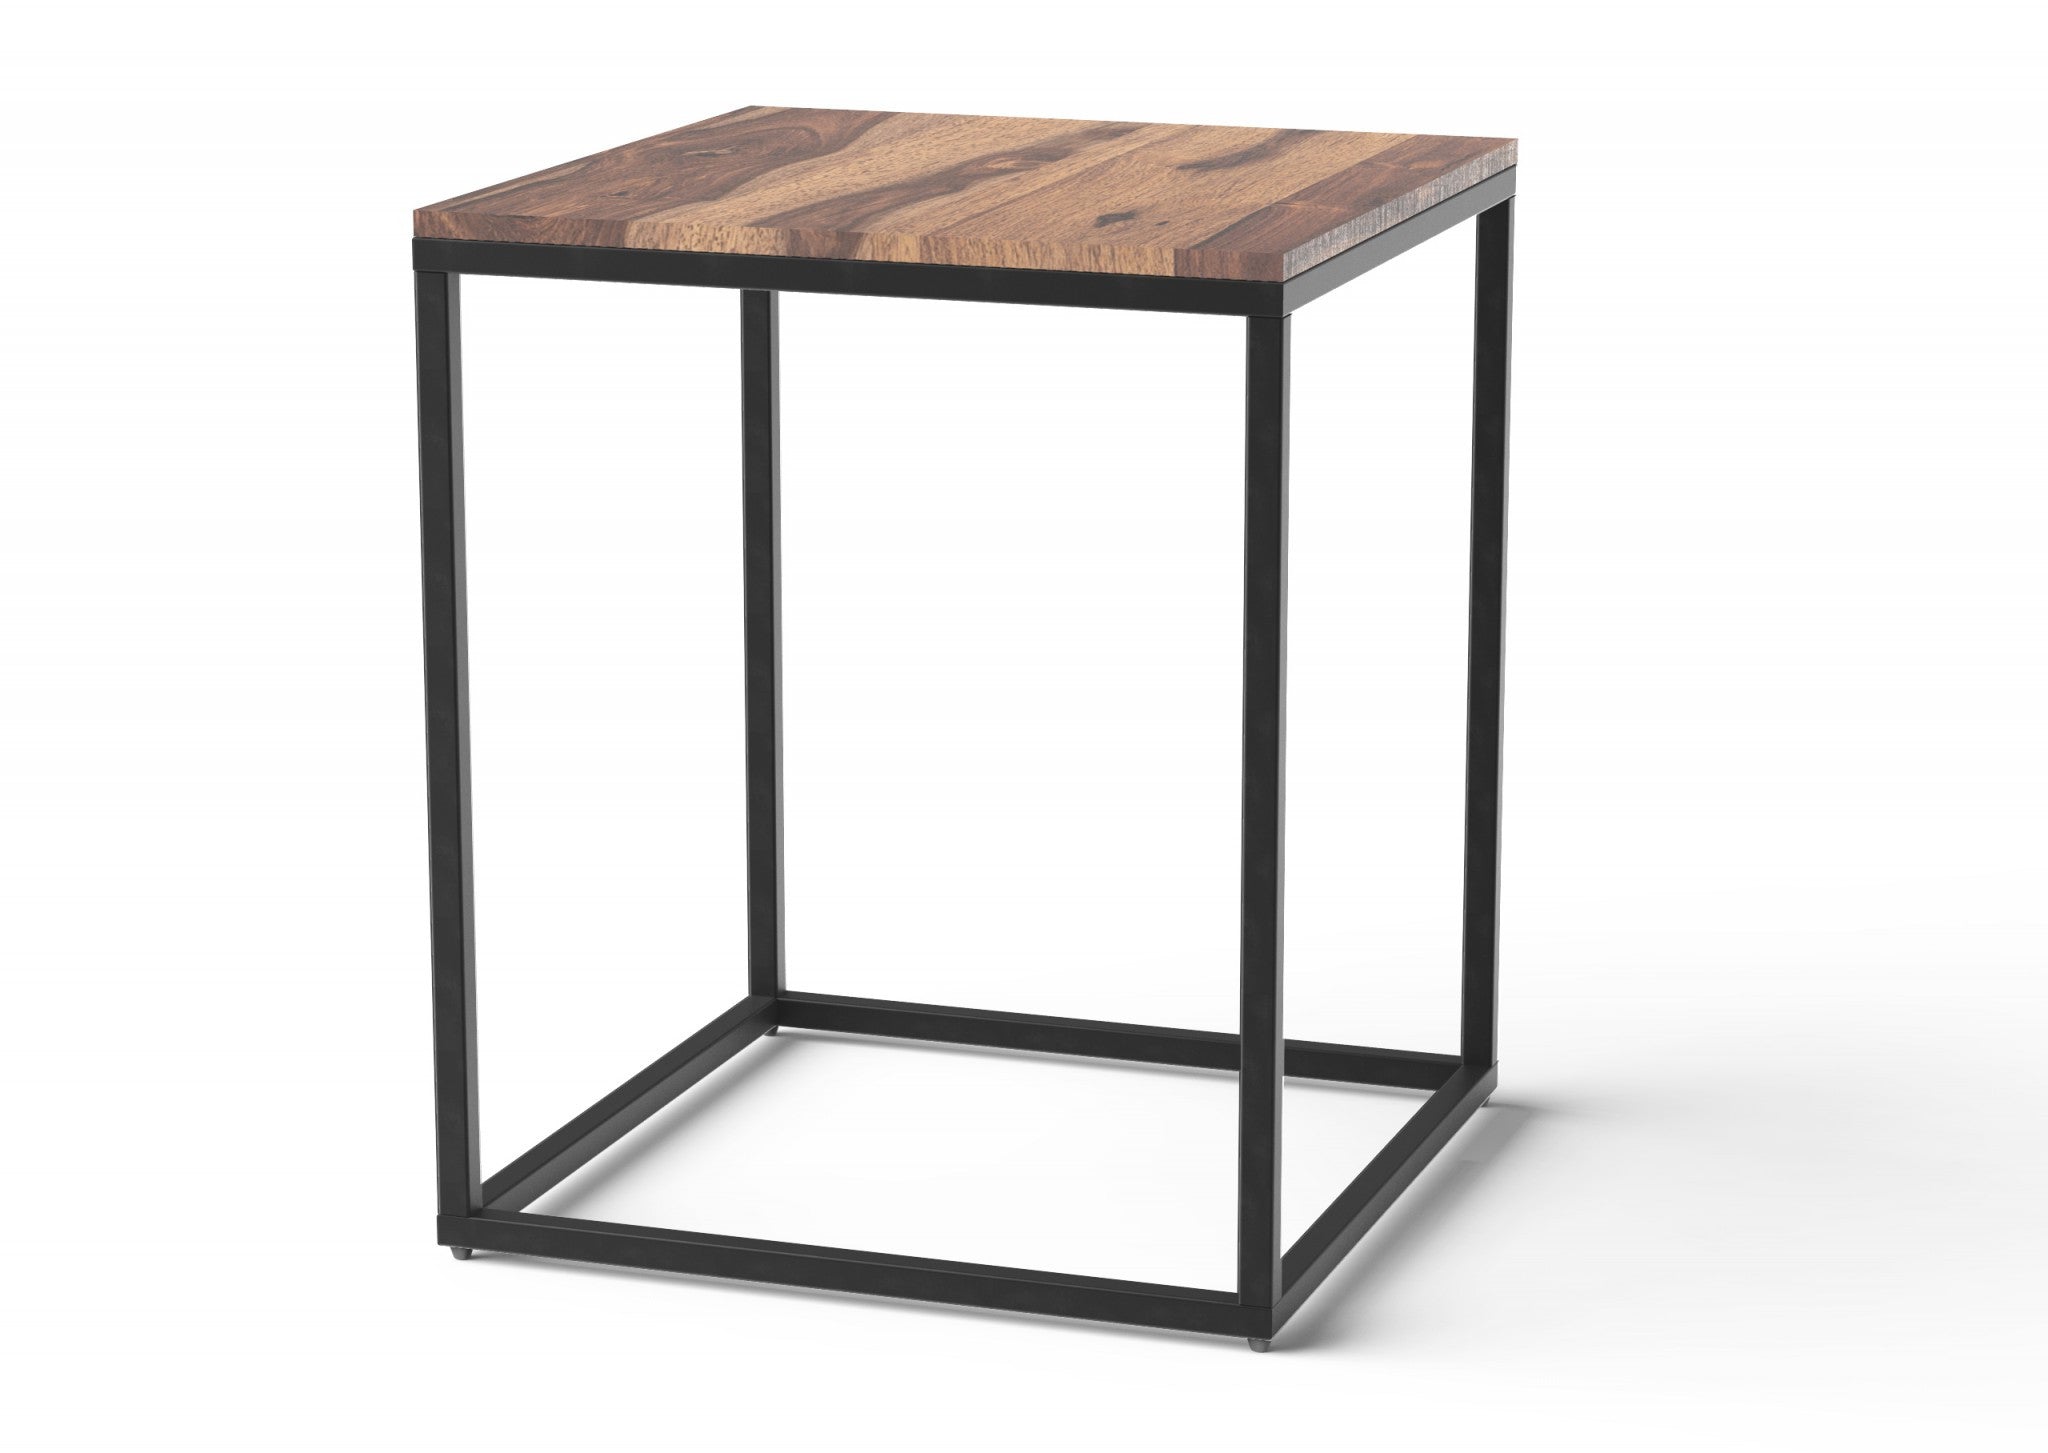 24" Black And Brown Solid Wood End Table